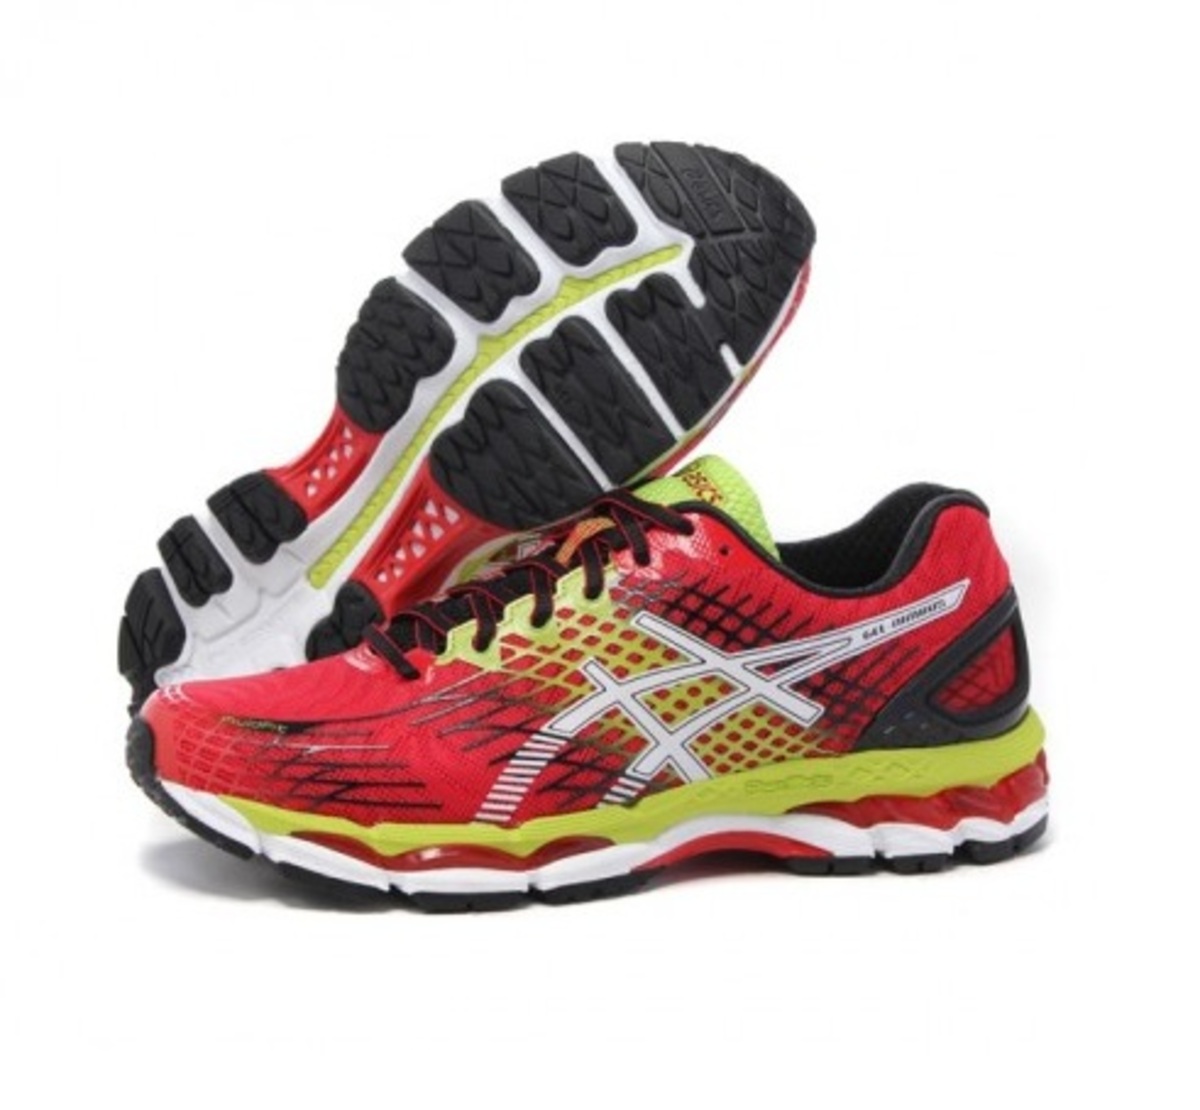 Gel Kayano 17 Mujer Marron Outlet, OFF |